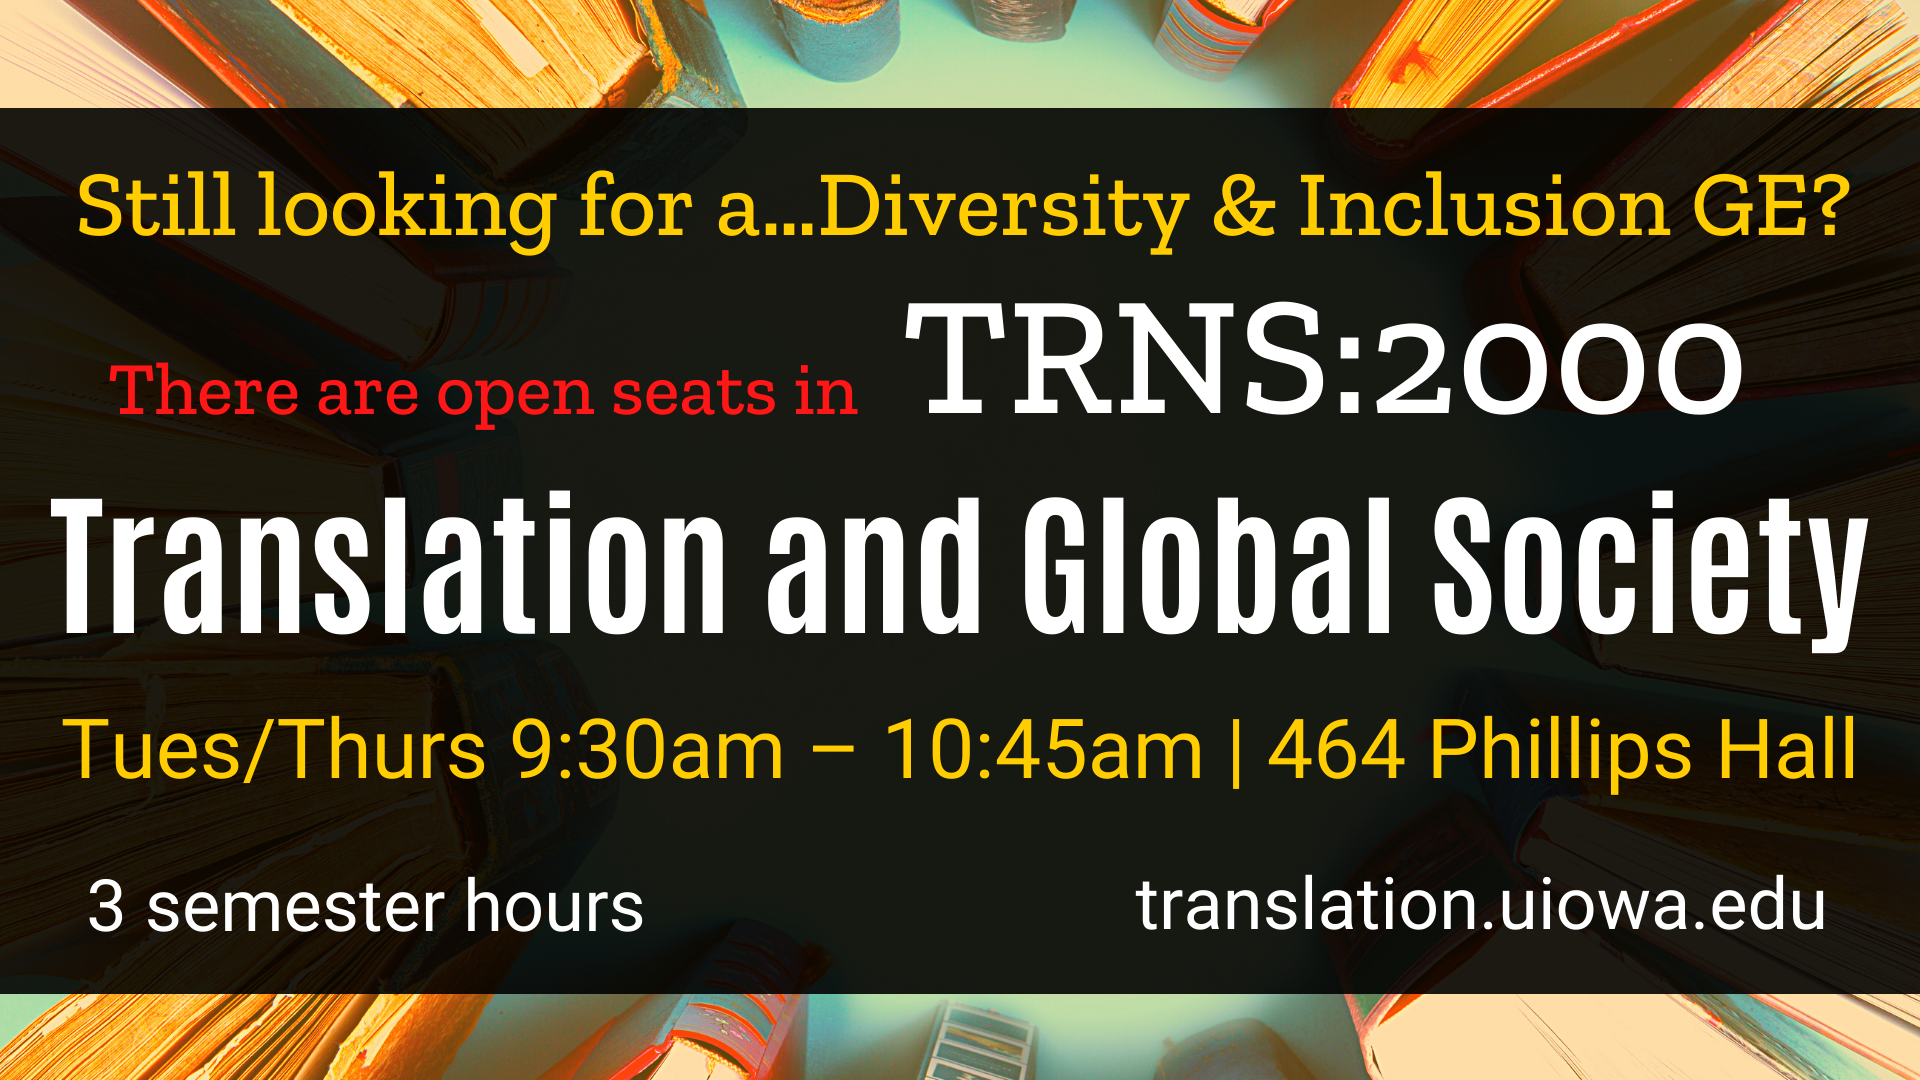 Still looking for a Diversity and Inclusion GE? There are seats open in TRNS 2000, Translation and Global Society. Class is Tuesdays and Thursdays from 9 thirty to ten forty five in 464 Phillips Hall. 3 semester hours. Visit translation.uiowa.edu for more!